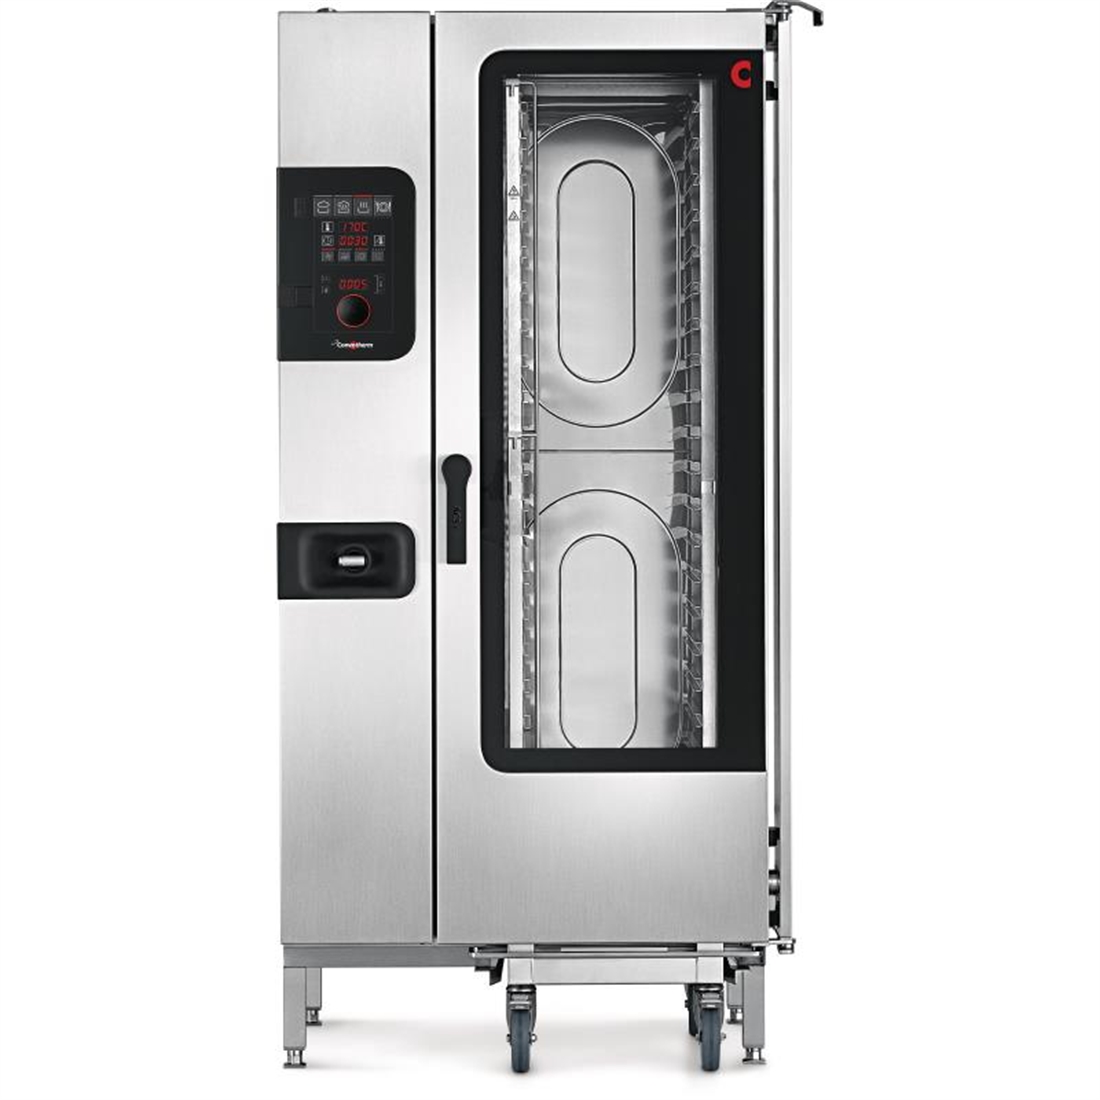 Convotherm 4 easyDial Combi Oven 20 x 1 x1 GN Grid with ConvoGrill